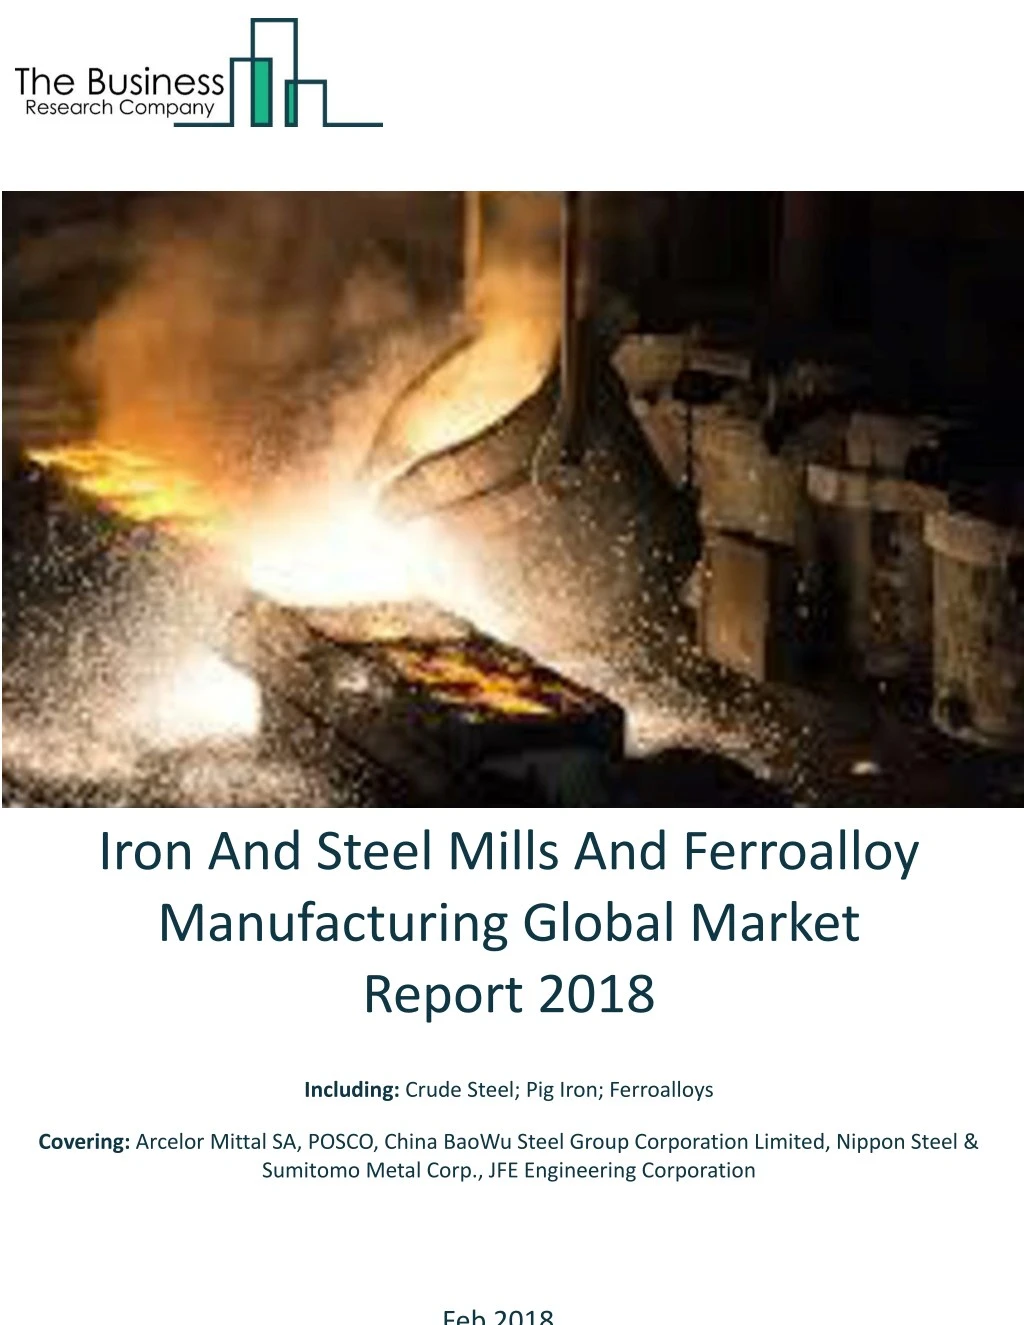 iron and steel mills and ferroalloy manufacturing